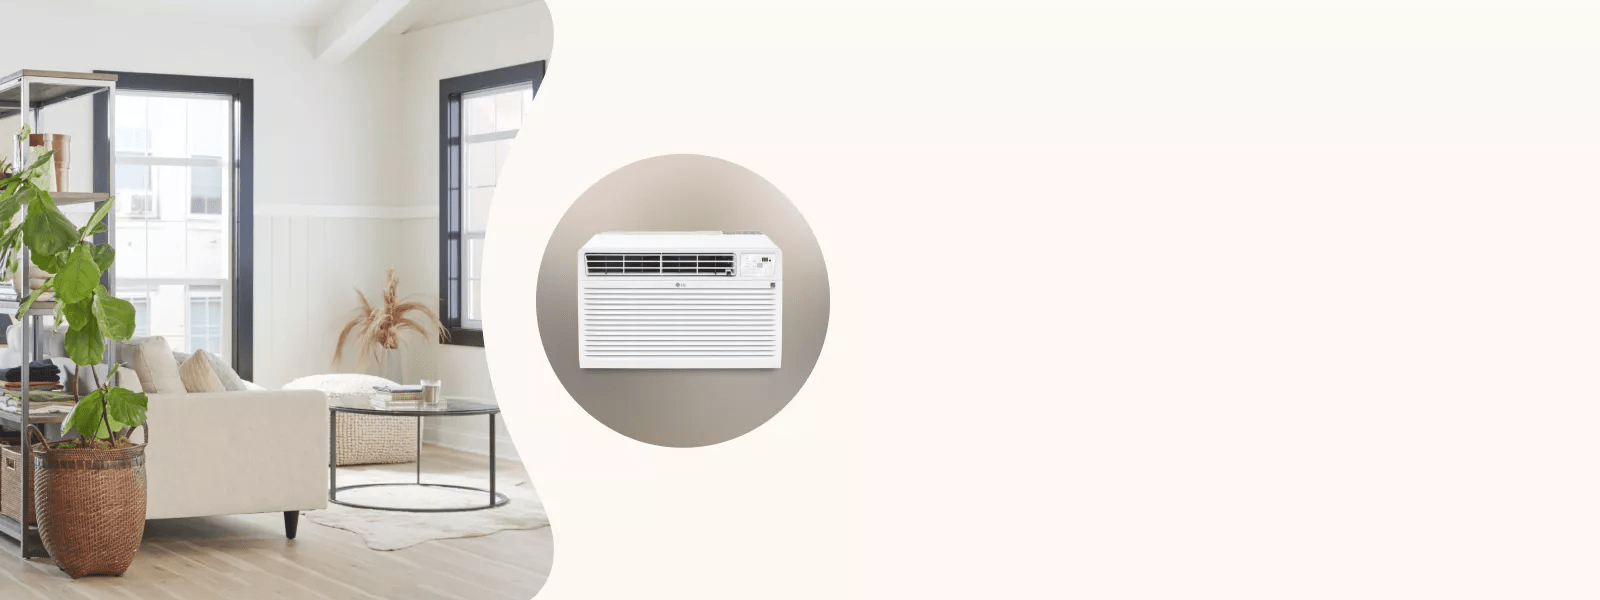 air-conditioners, wall-air-conditioners, window-air-conditioners, portable-air-conditioners  